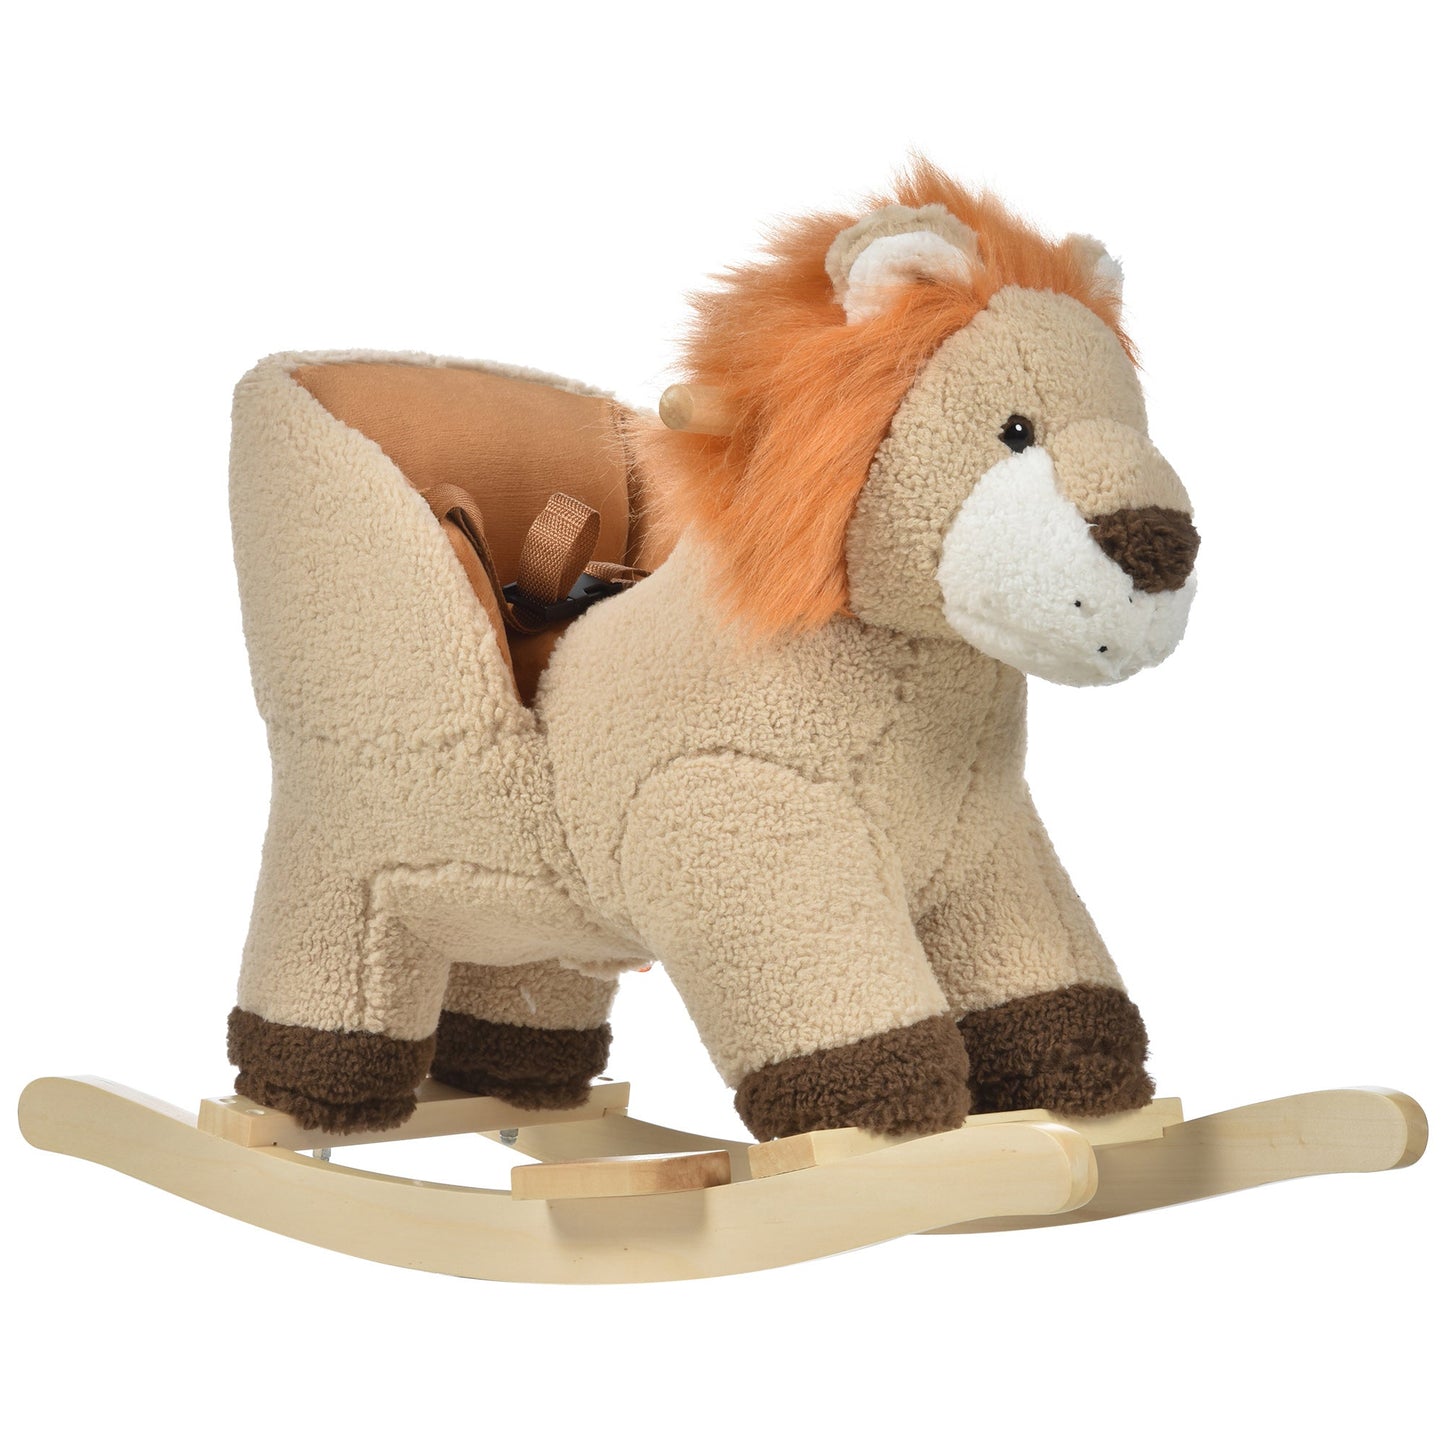 Baby Rocking Horse Lion Design Plush Stuffed Rocking Chair, Wooden Rocking Horse with Sound, Seat Belt for 18-36 Months Boys and Girls Gift, Brown at Gallery Canada